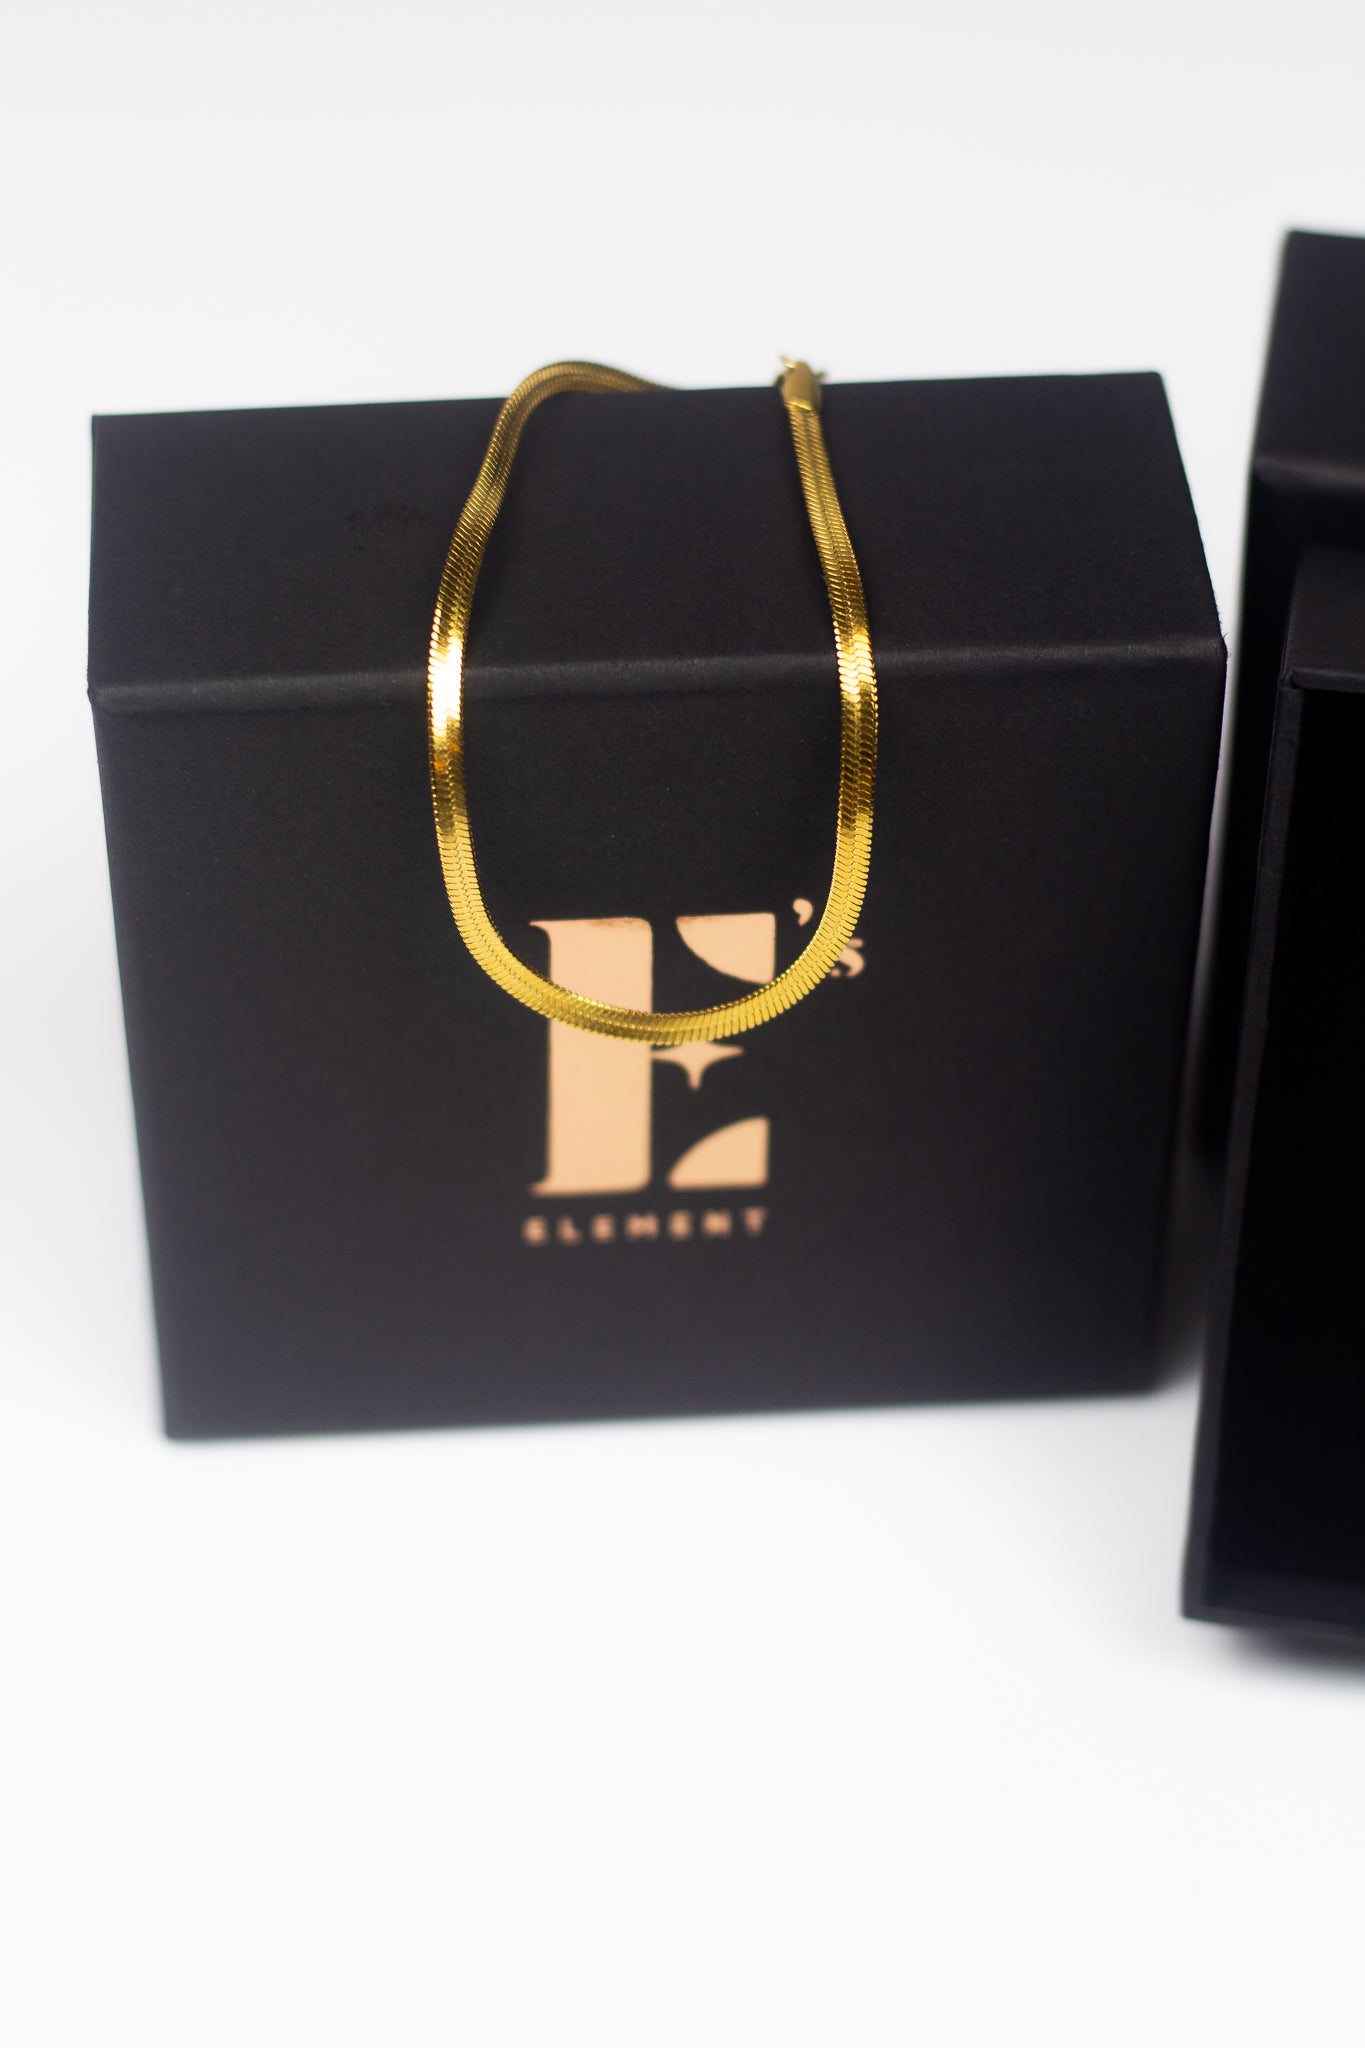 18K gold snake chain anklet resting on top of its container. E's Element is labelled on the container in gold. The anklet is named "The Steph" Herringbone Anklet by E's Element